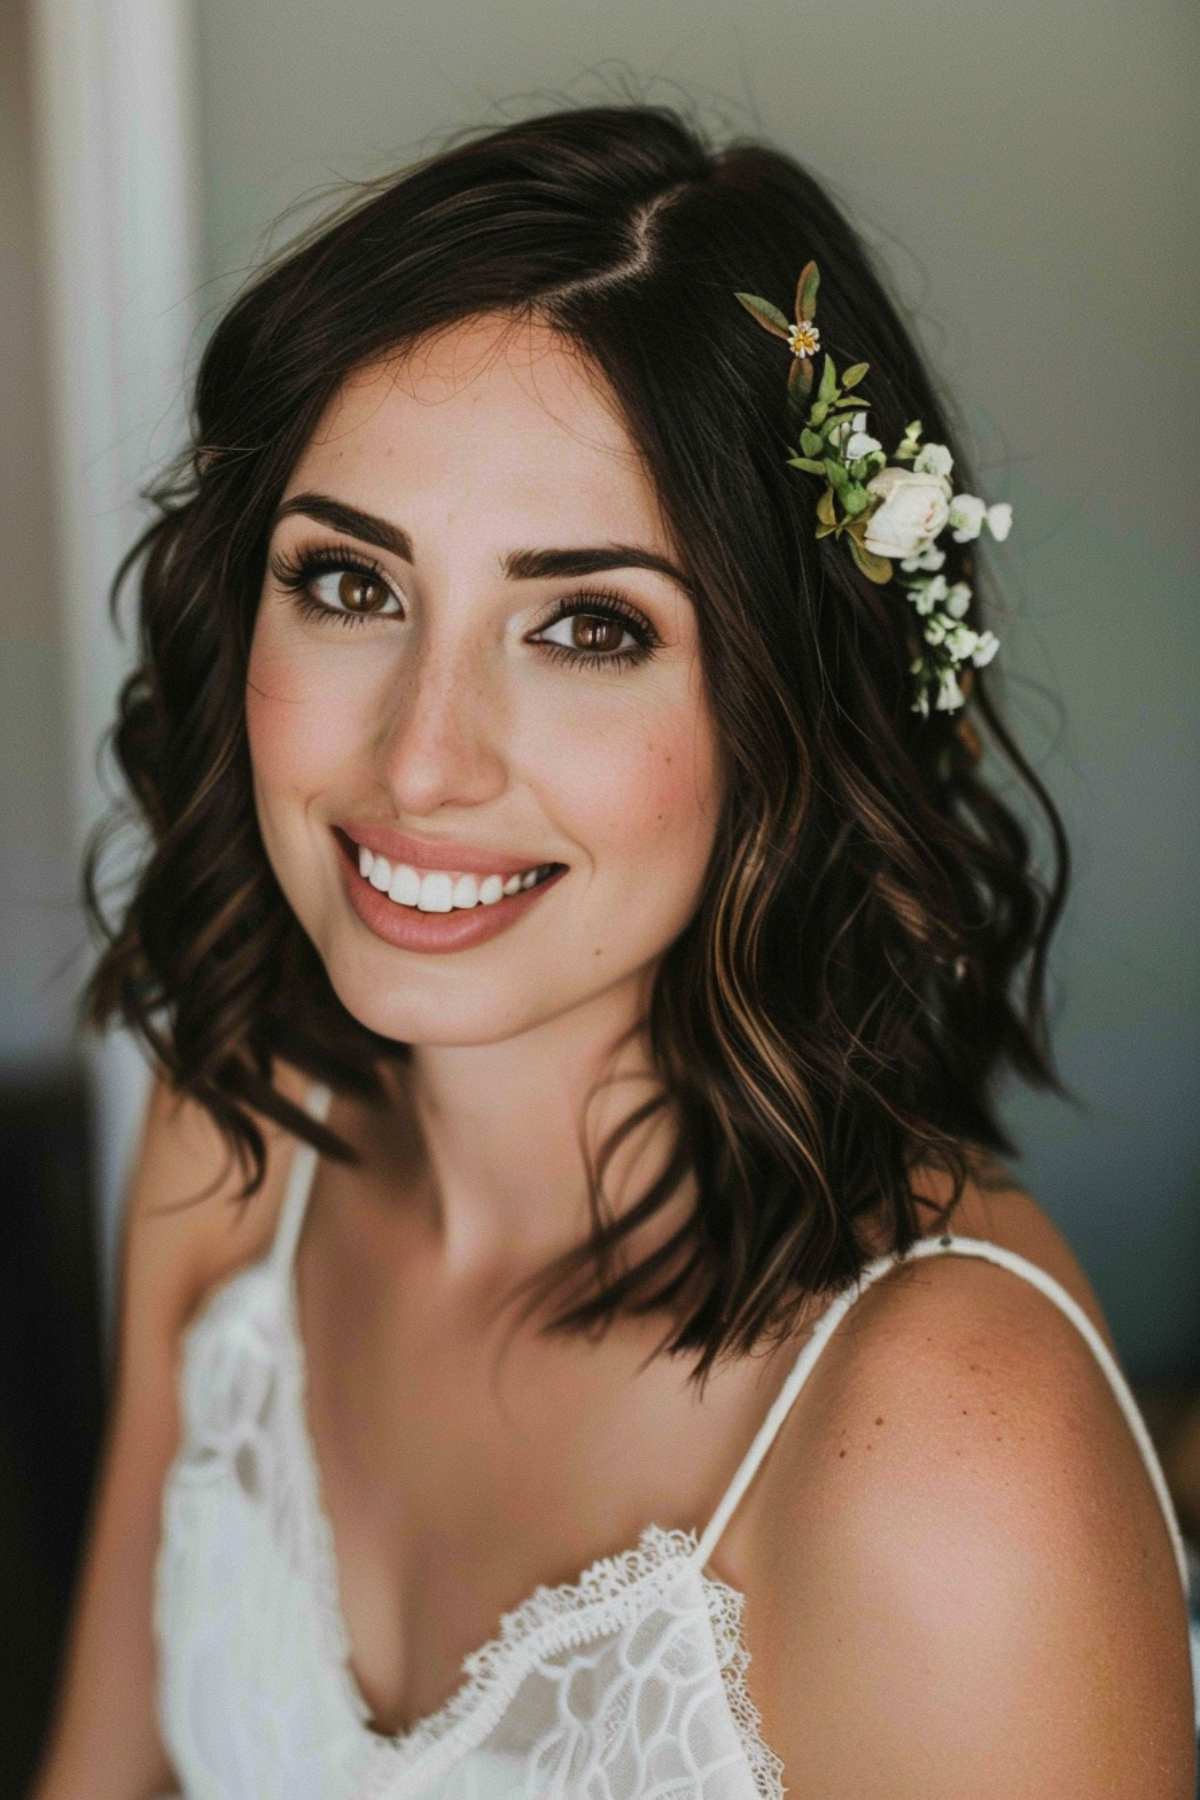 Bride with a trendy medium bob styled in soft waves, accented with a delicate floral hairpiece for a romantic look.